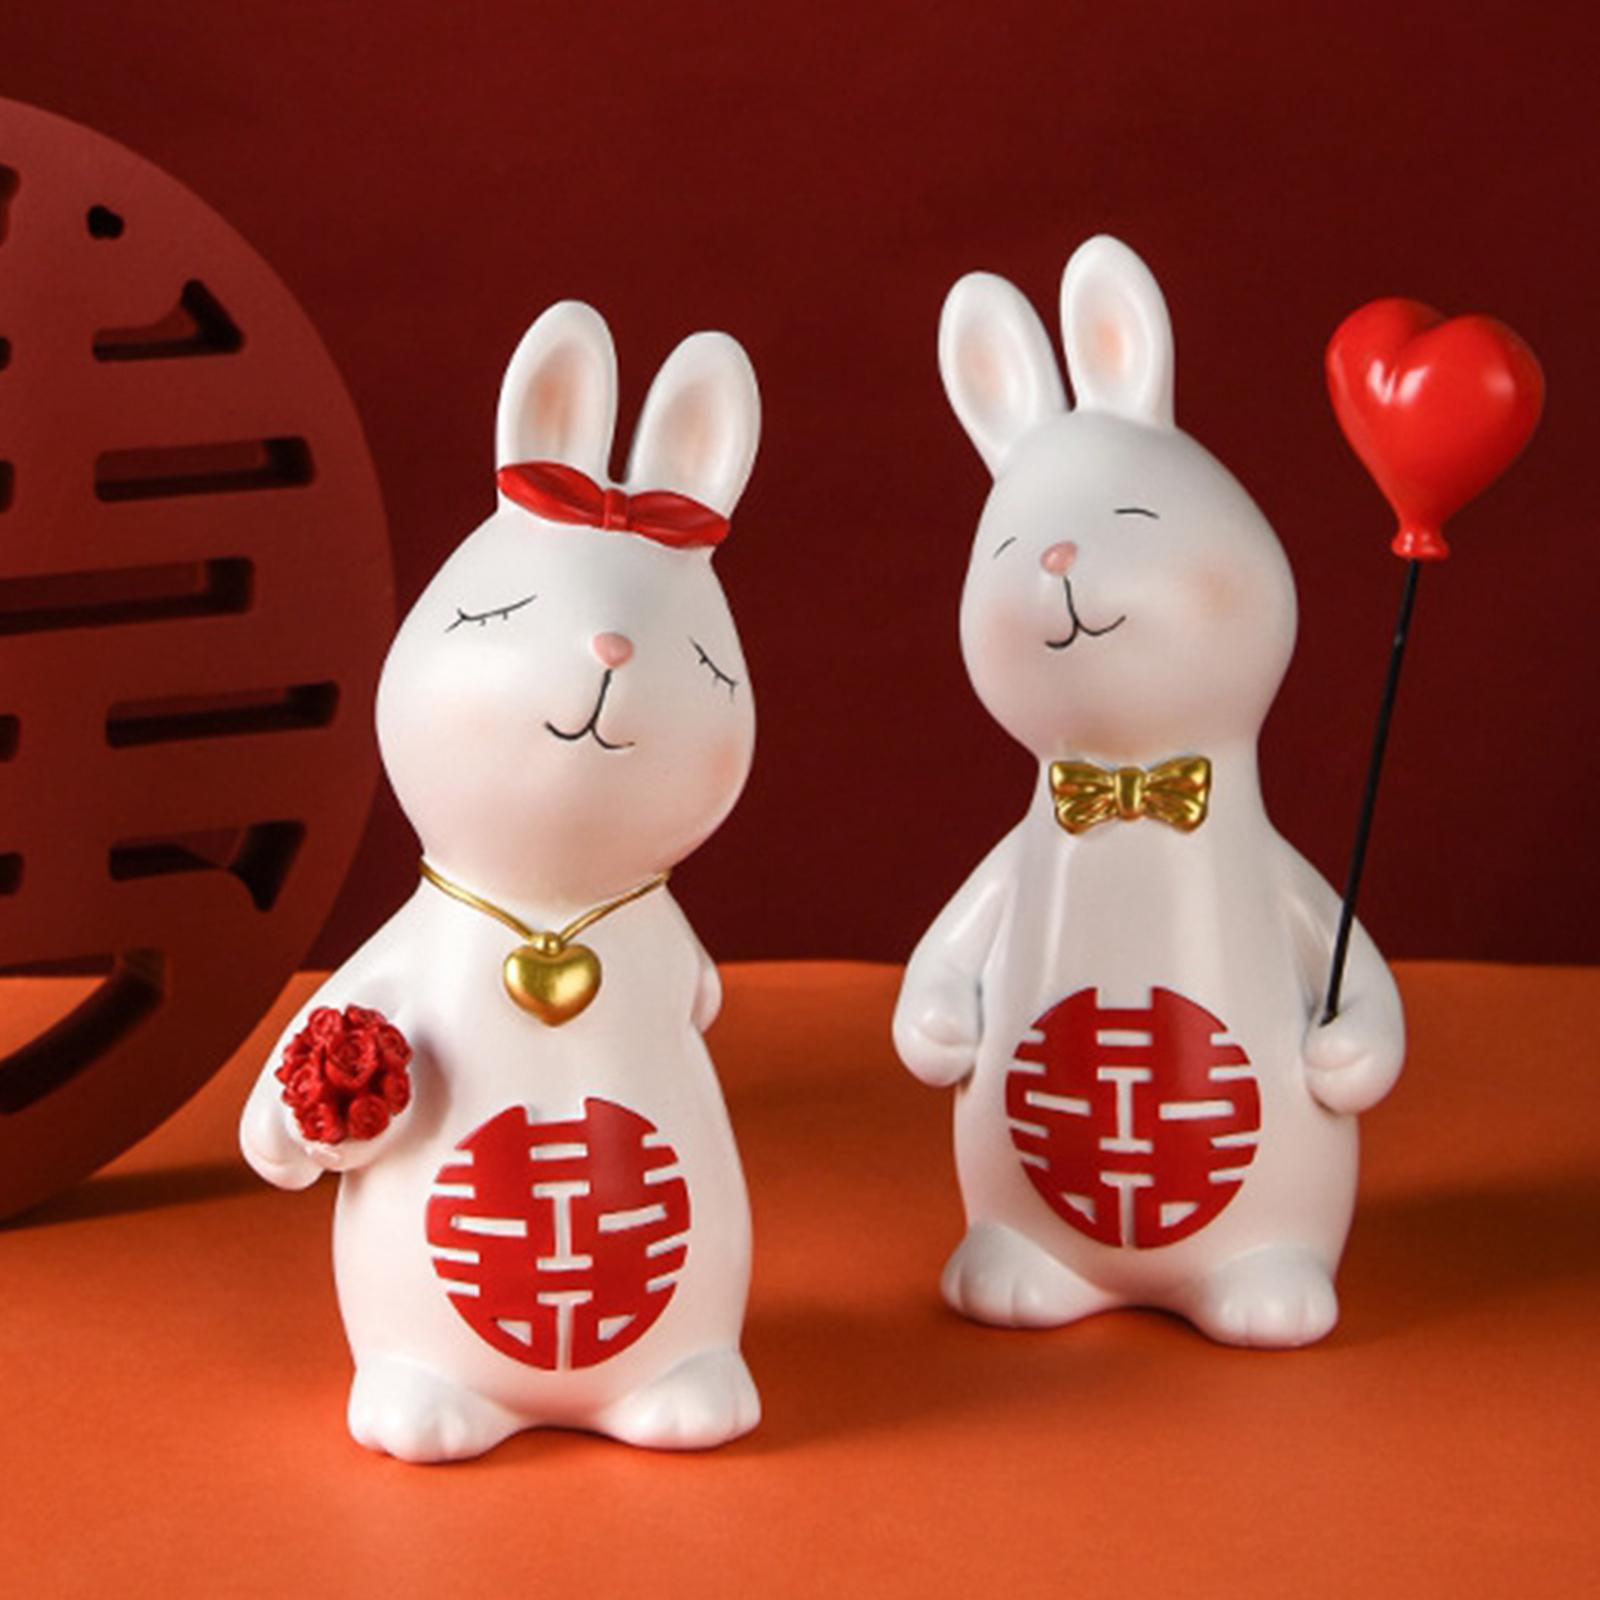 2x Couple Rabbit Statue Weddings Bunny Resin Figurines for Home Decoration